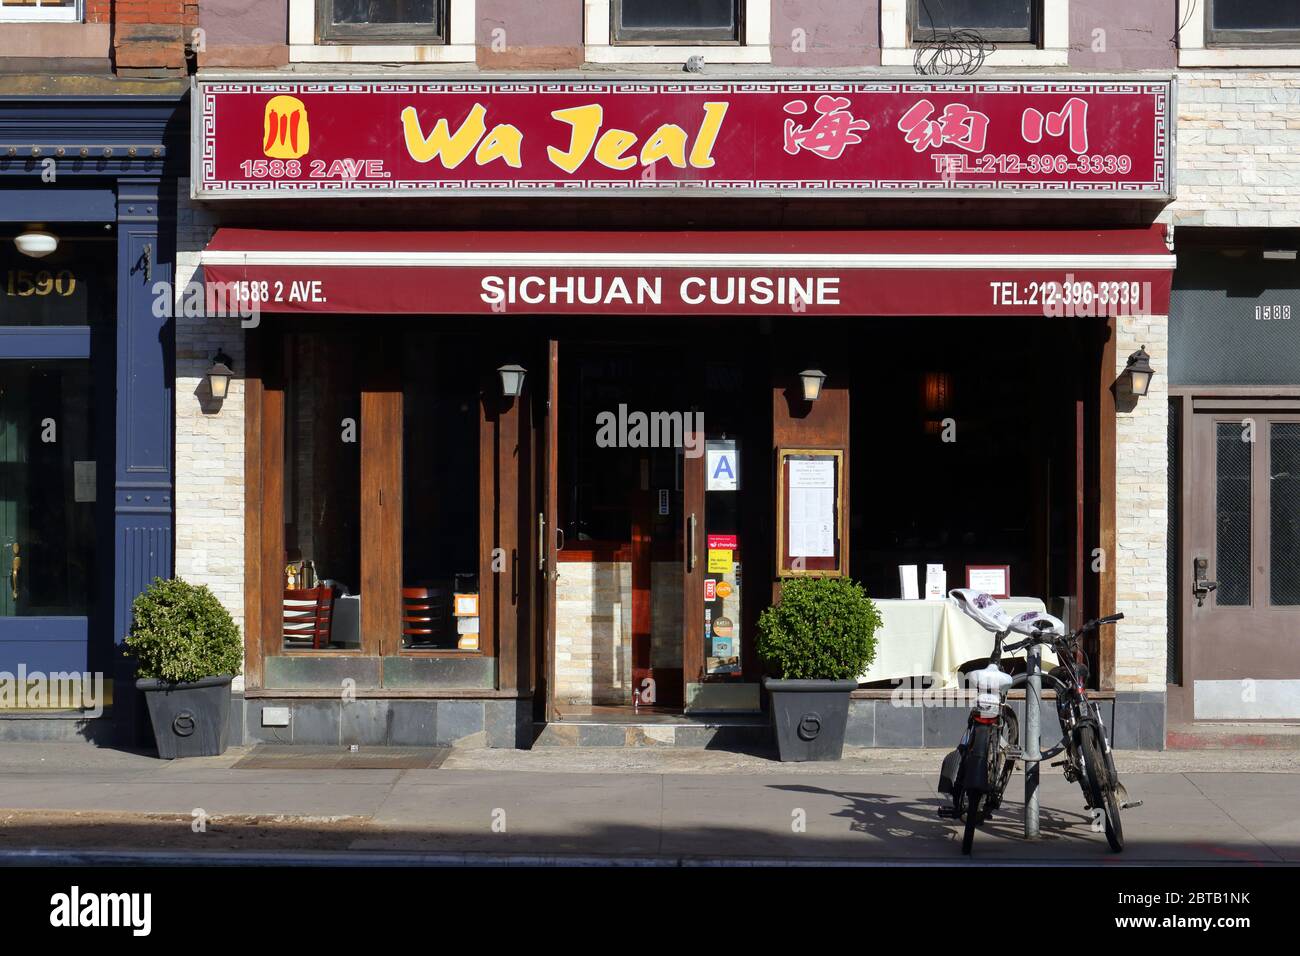 Wa Jeal, 1588 2nd Avenue, New York, NY. exterior storefront of a Chinese Sichuan restaurant in the Upper East Side of Manhattan Stock Photo